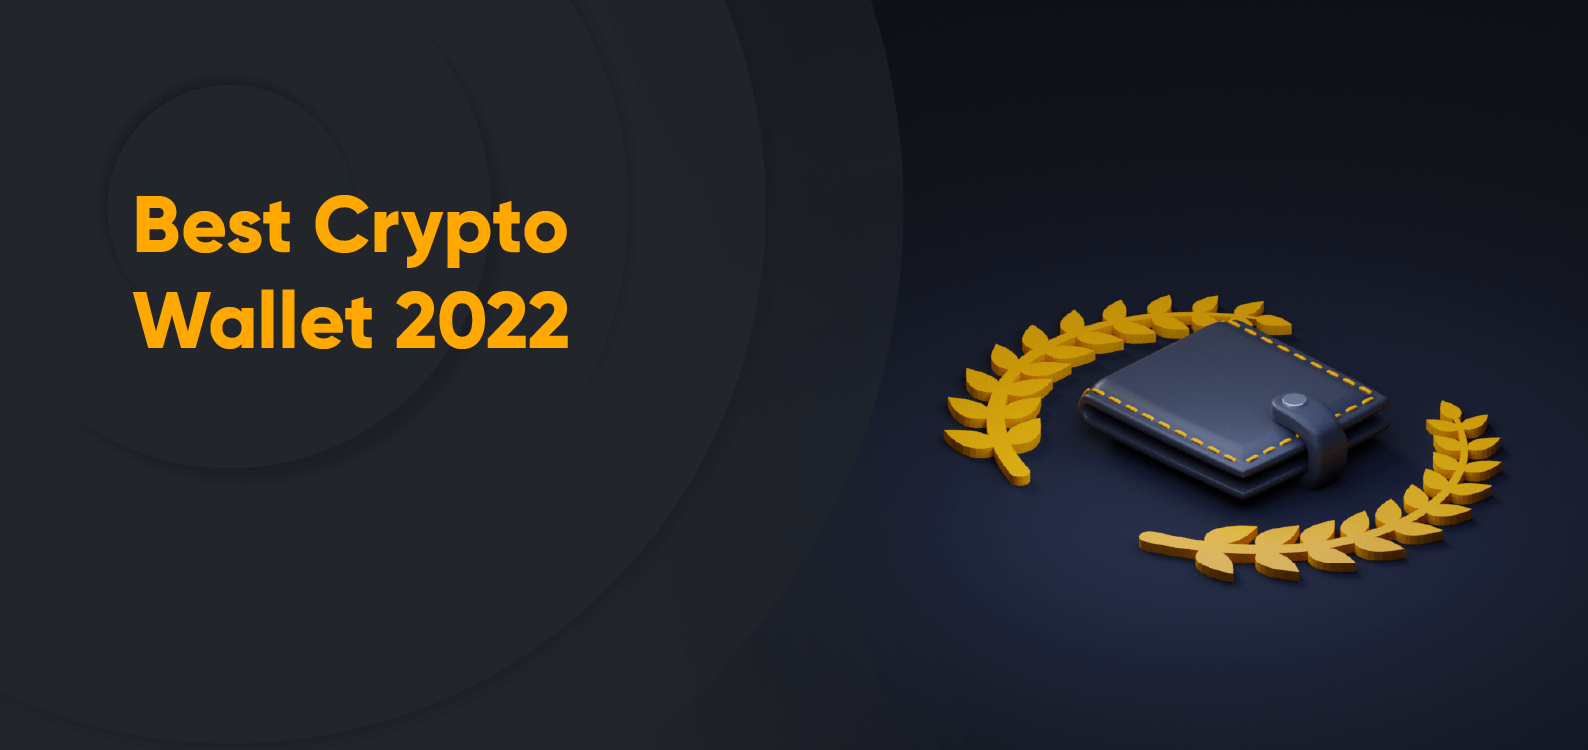 HiveOS — The 10 Best Crypto Wallets of 2022